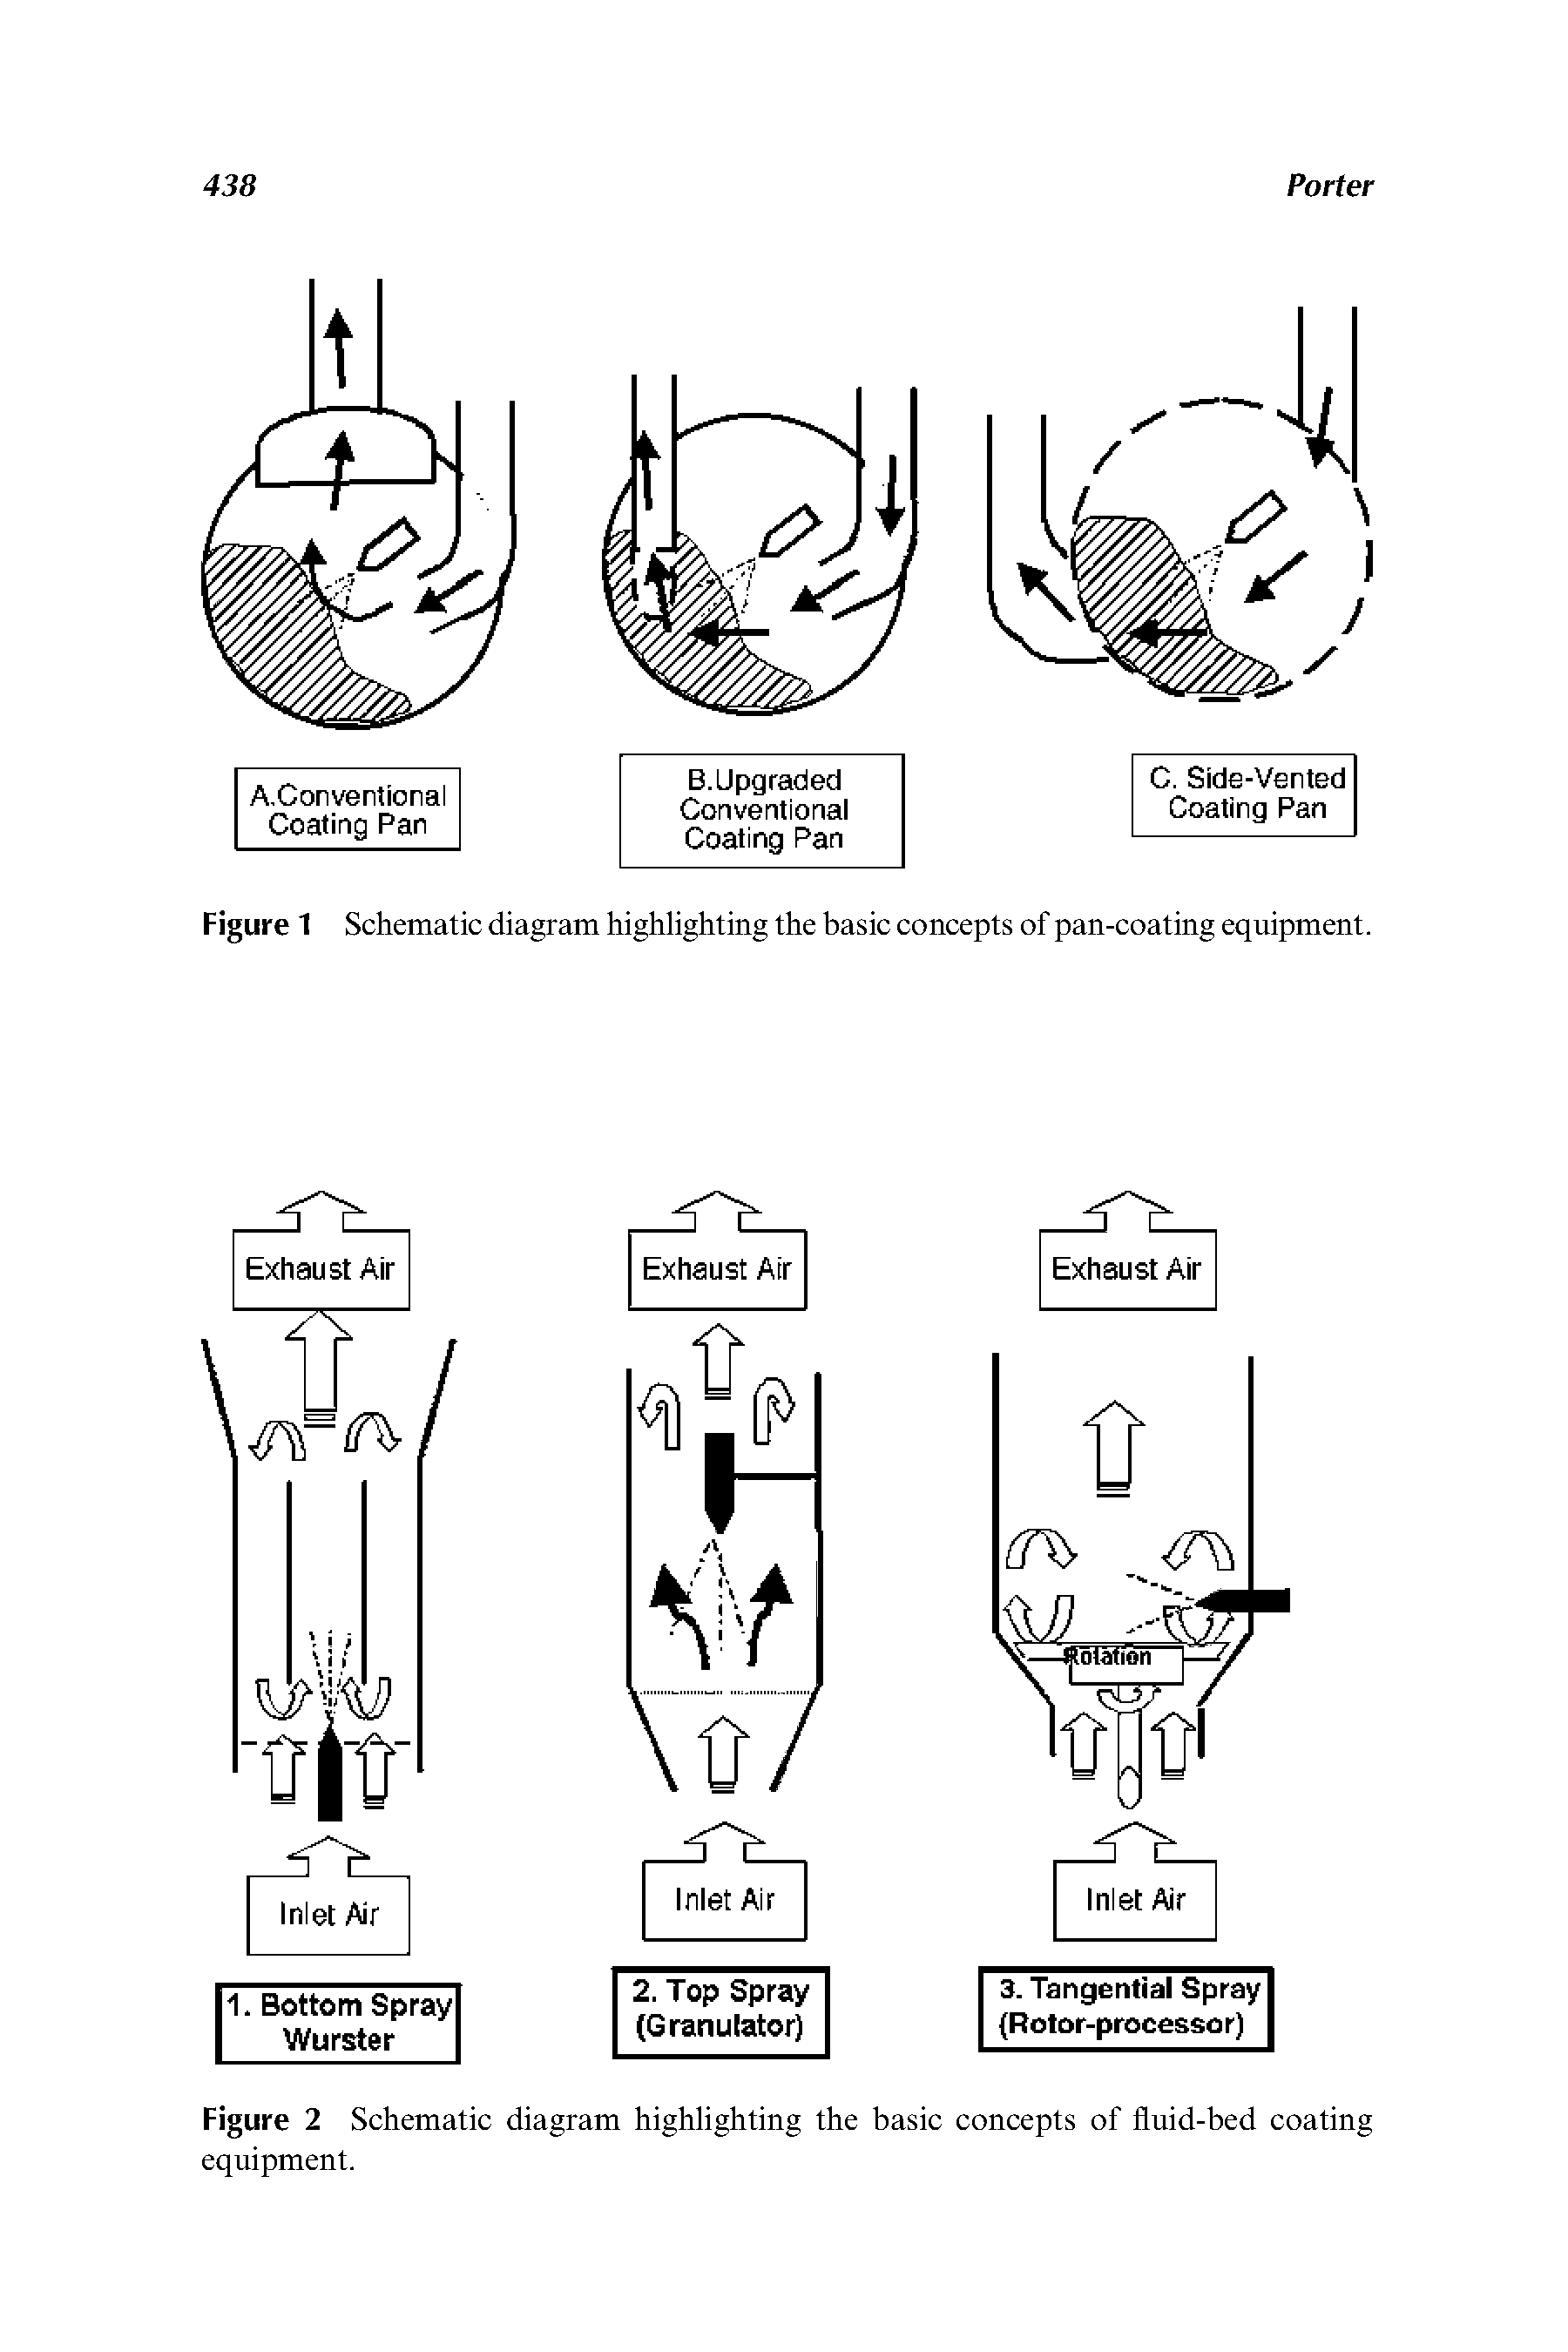 Figure 1 Schematic diagram highlighting the basic concepts of pan-coating equipment.